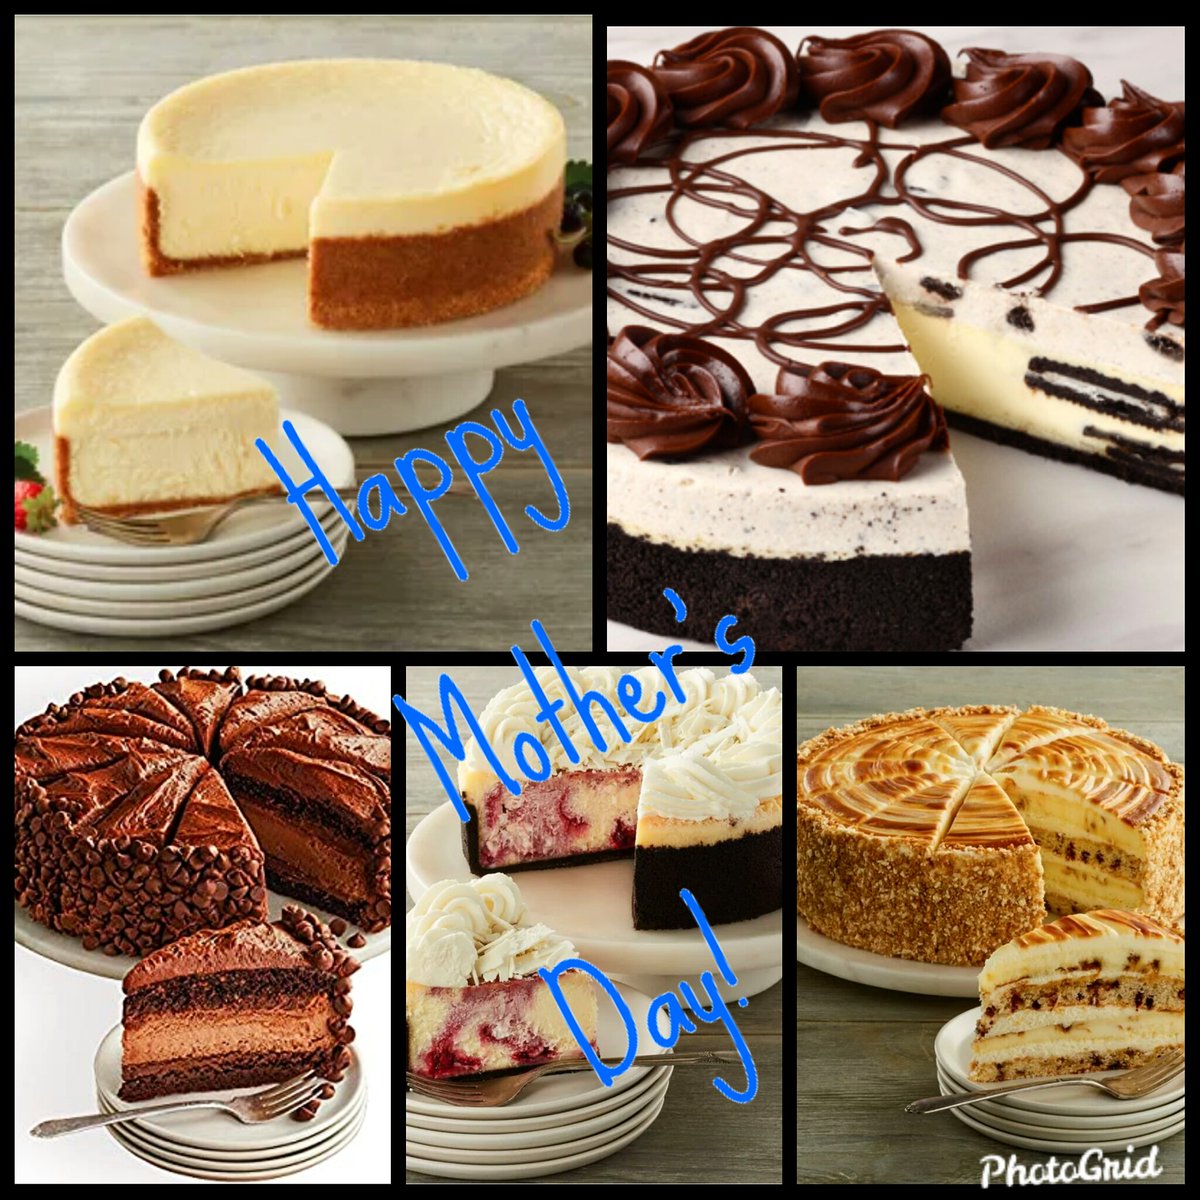 Did you know?
We have whole #cheesecakfactory #cheesecakes perfect for #mothersday
Call 207 621 0038 for #curbsidepickup. #flavors are #whitechocolateraspberry #cinnabonlayer #newyorkstyle #hersheyschocolate and #oreoscookiesandcream #didyouknow #may10th #treatmom #mom #grandma